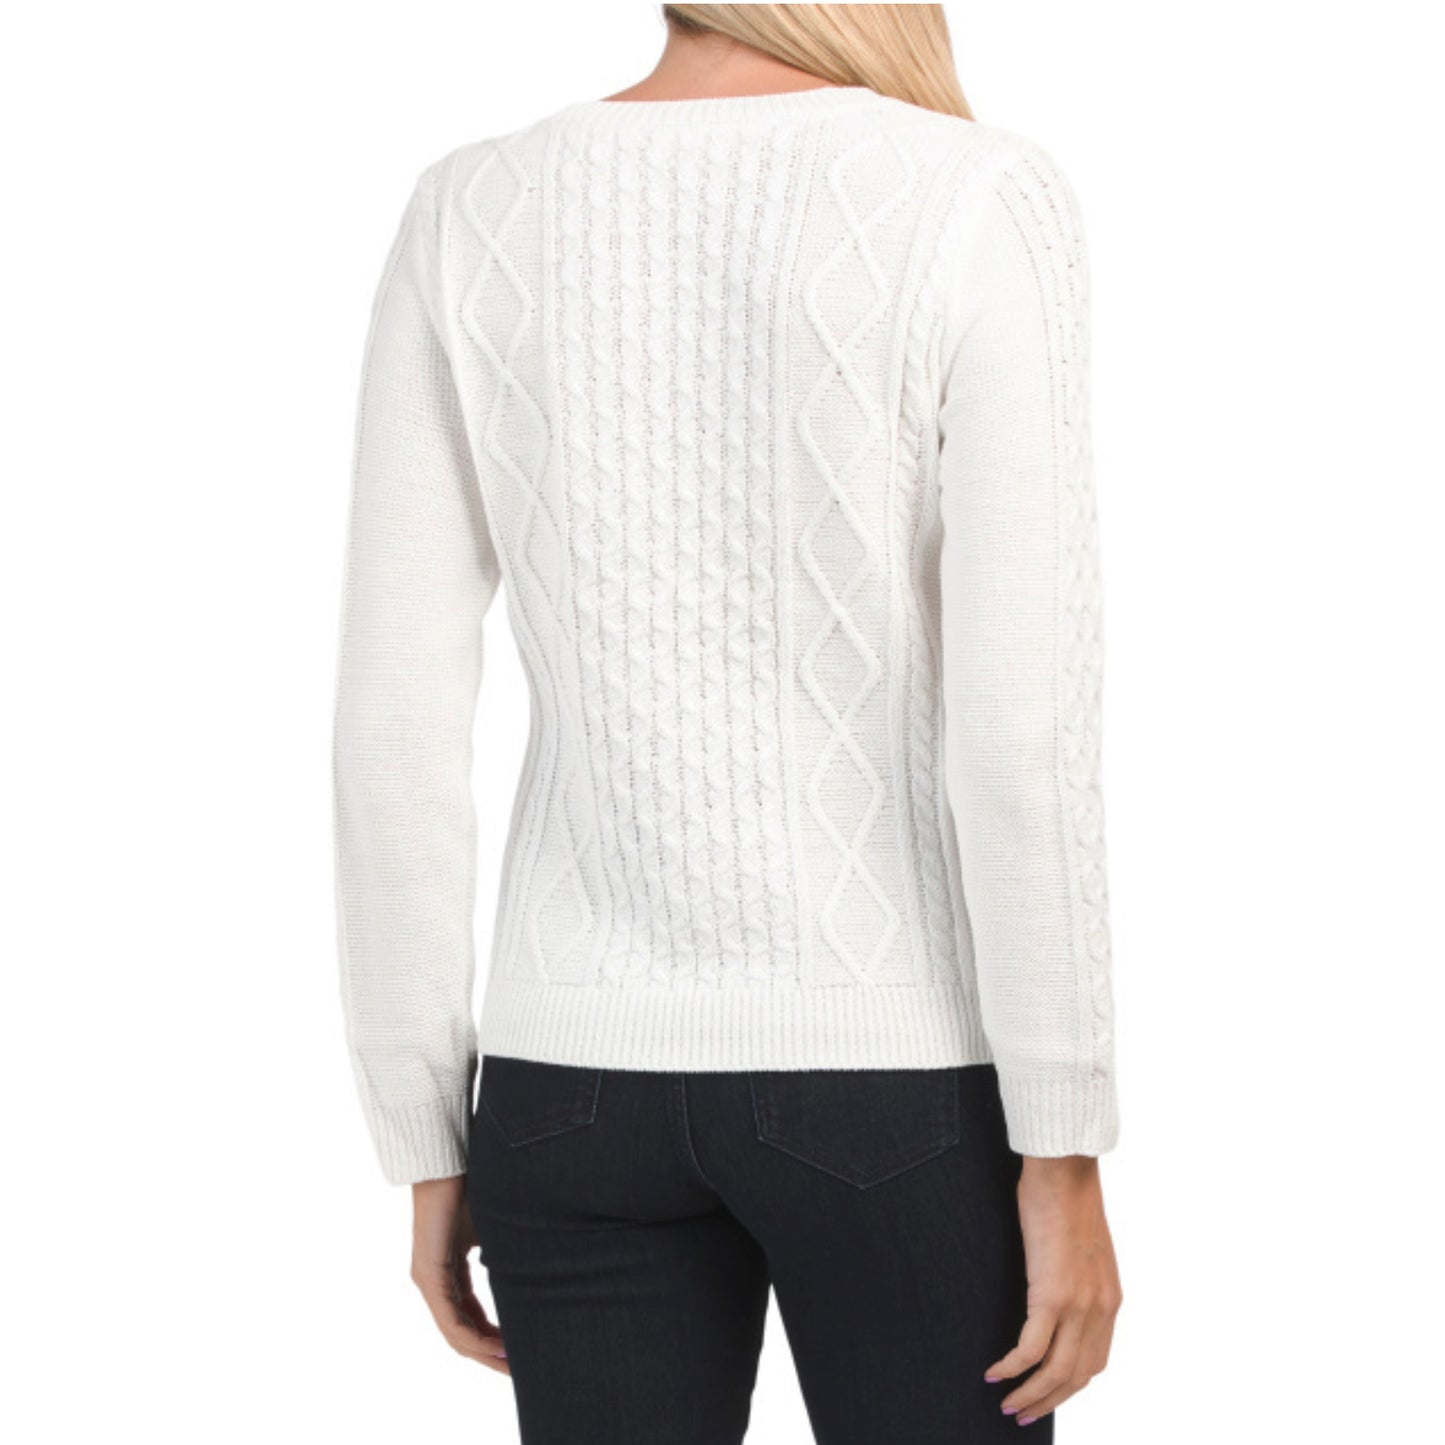 Kaily K Women's Cut Out Soft Cotton Blend Cable Knit Sweater